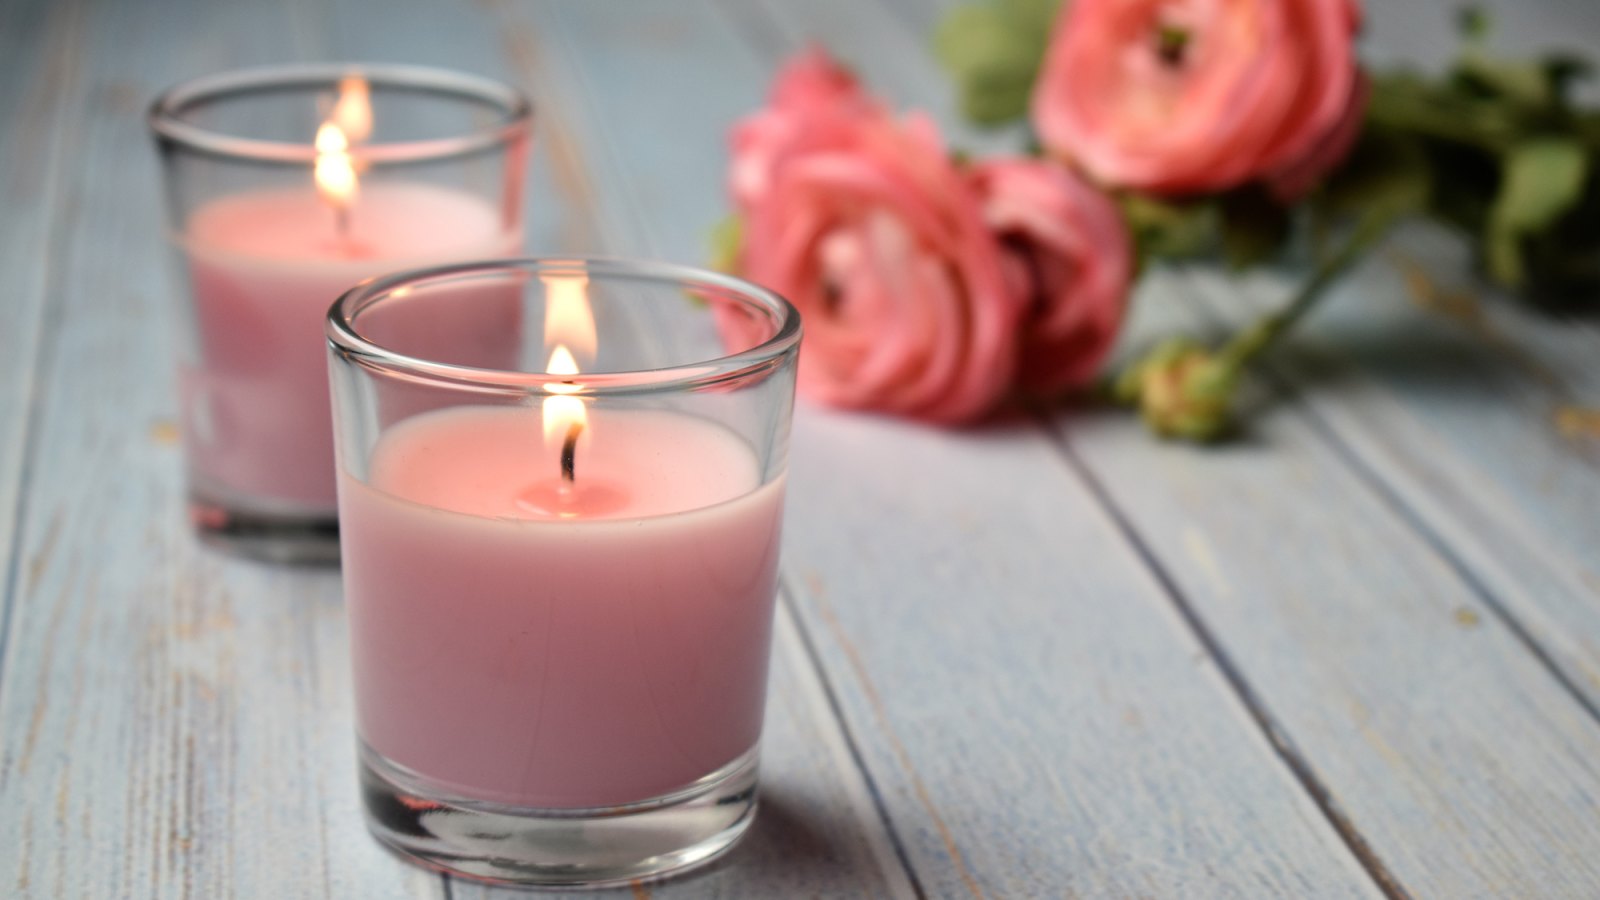 Scented pink candles with flowers in the background, close-up